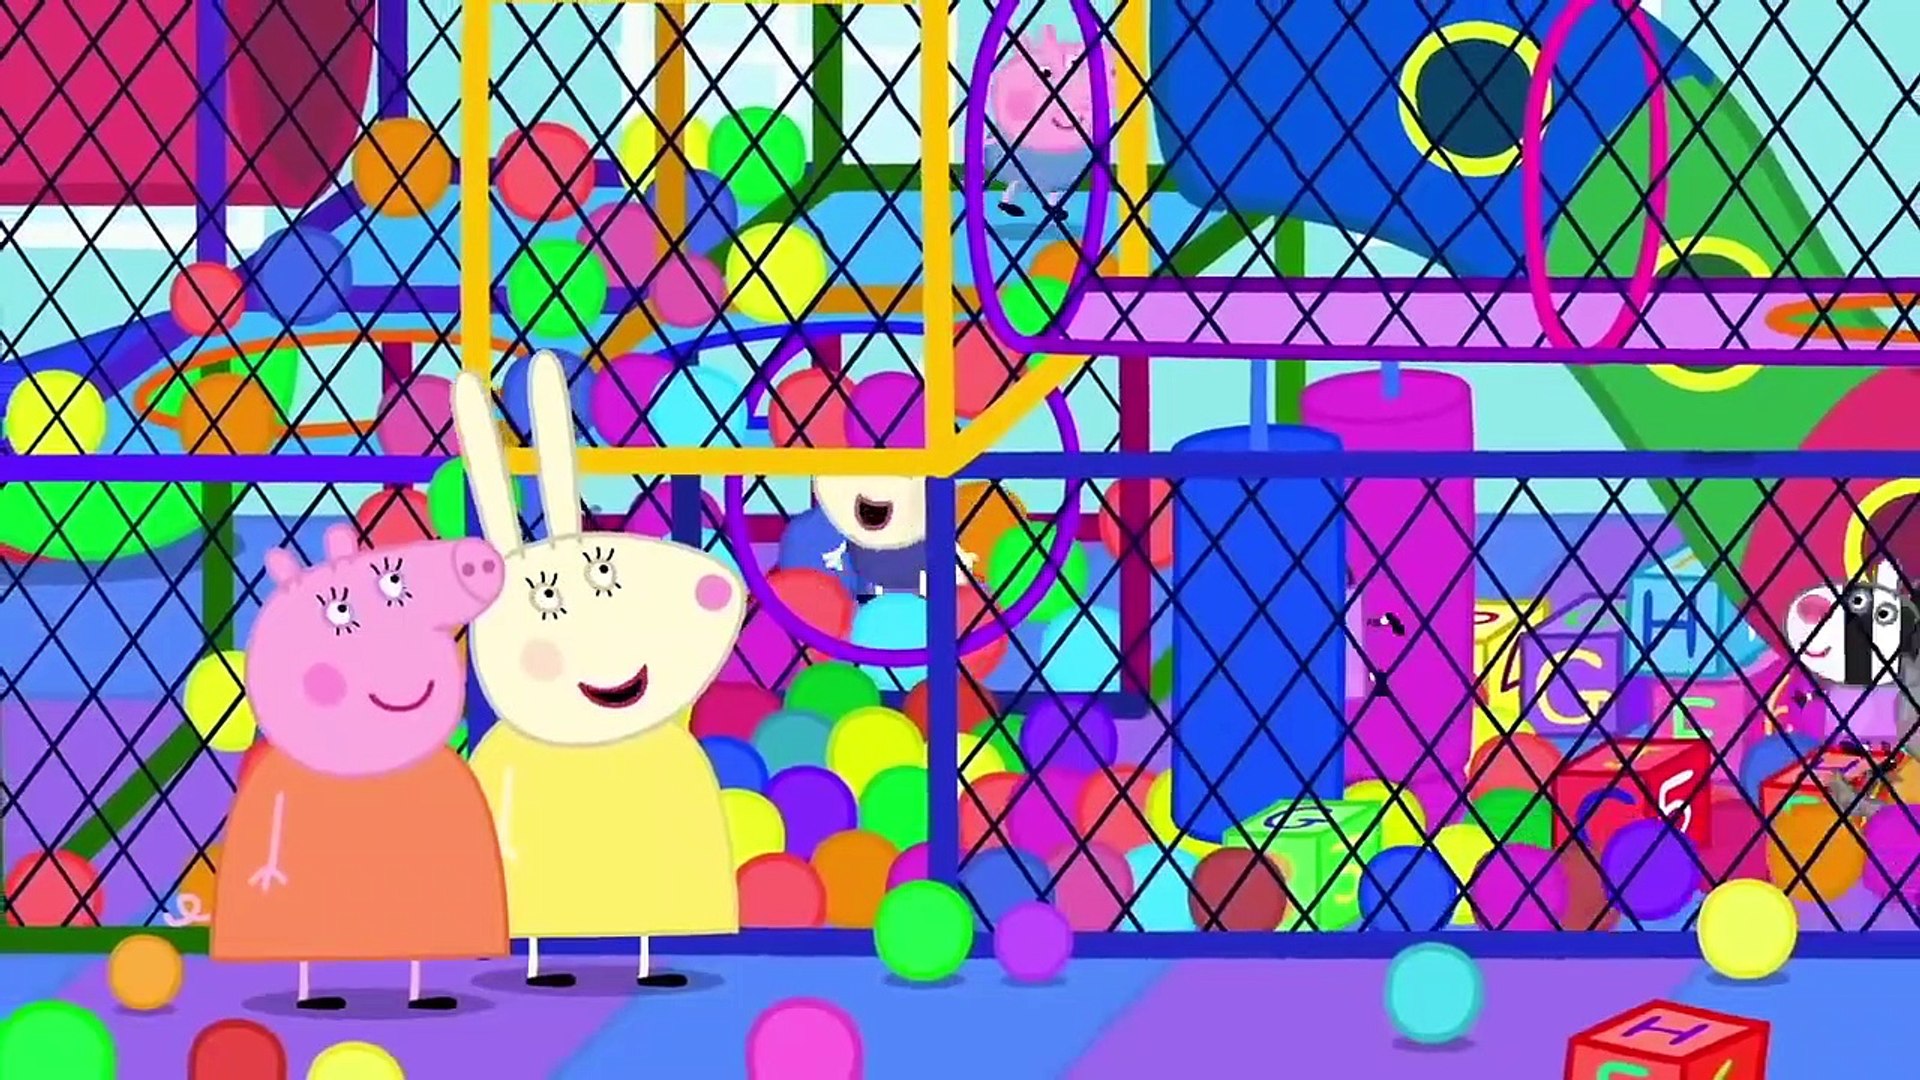 I Edited A Peppa Pig Episode - video Dailymotion